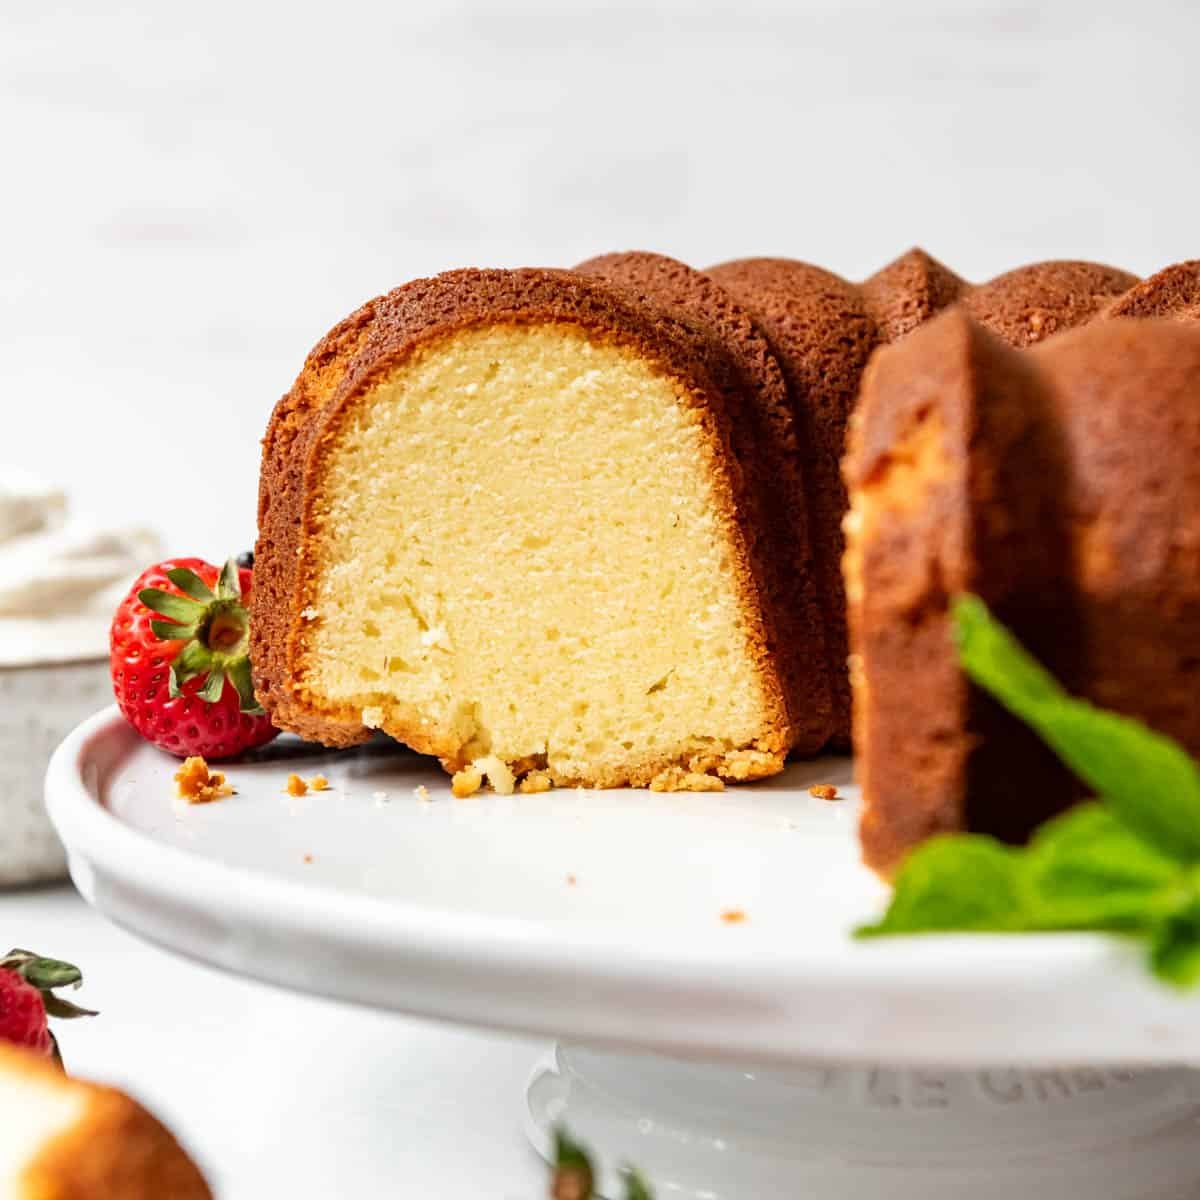 Cream Cheese Pound Cake Recipe - Step By Step Guide - Poke Bowl Cocoabeach